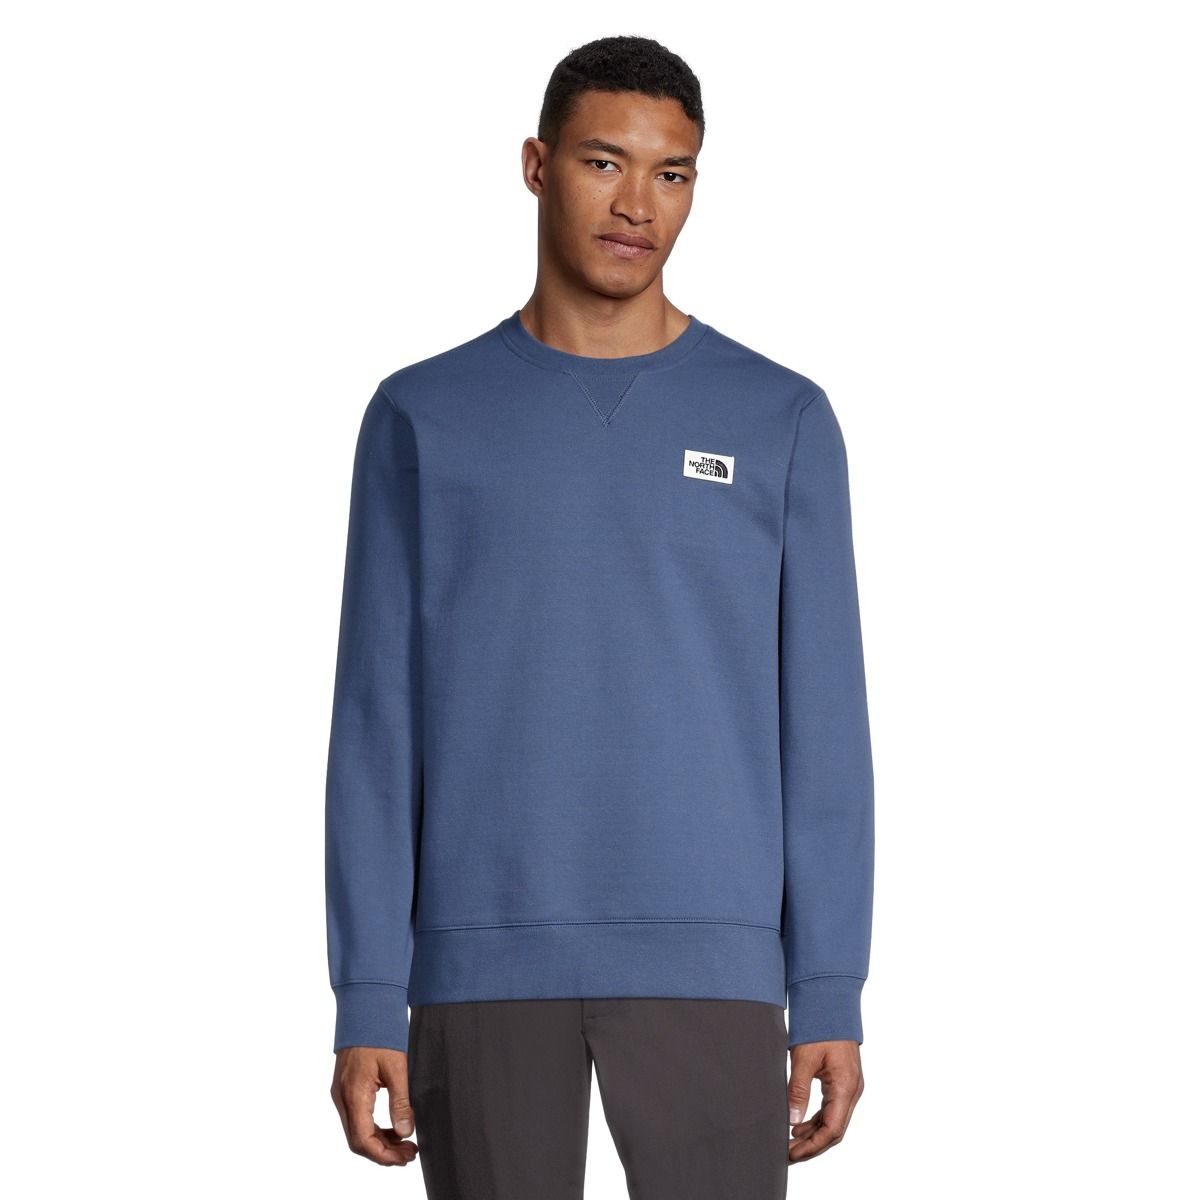 The North Face Men's Heritage Patch Sweatshirt